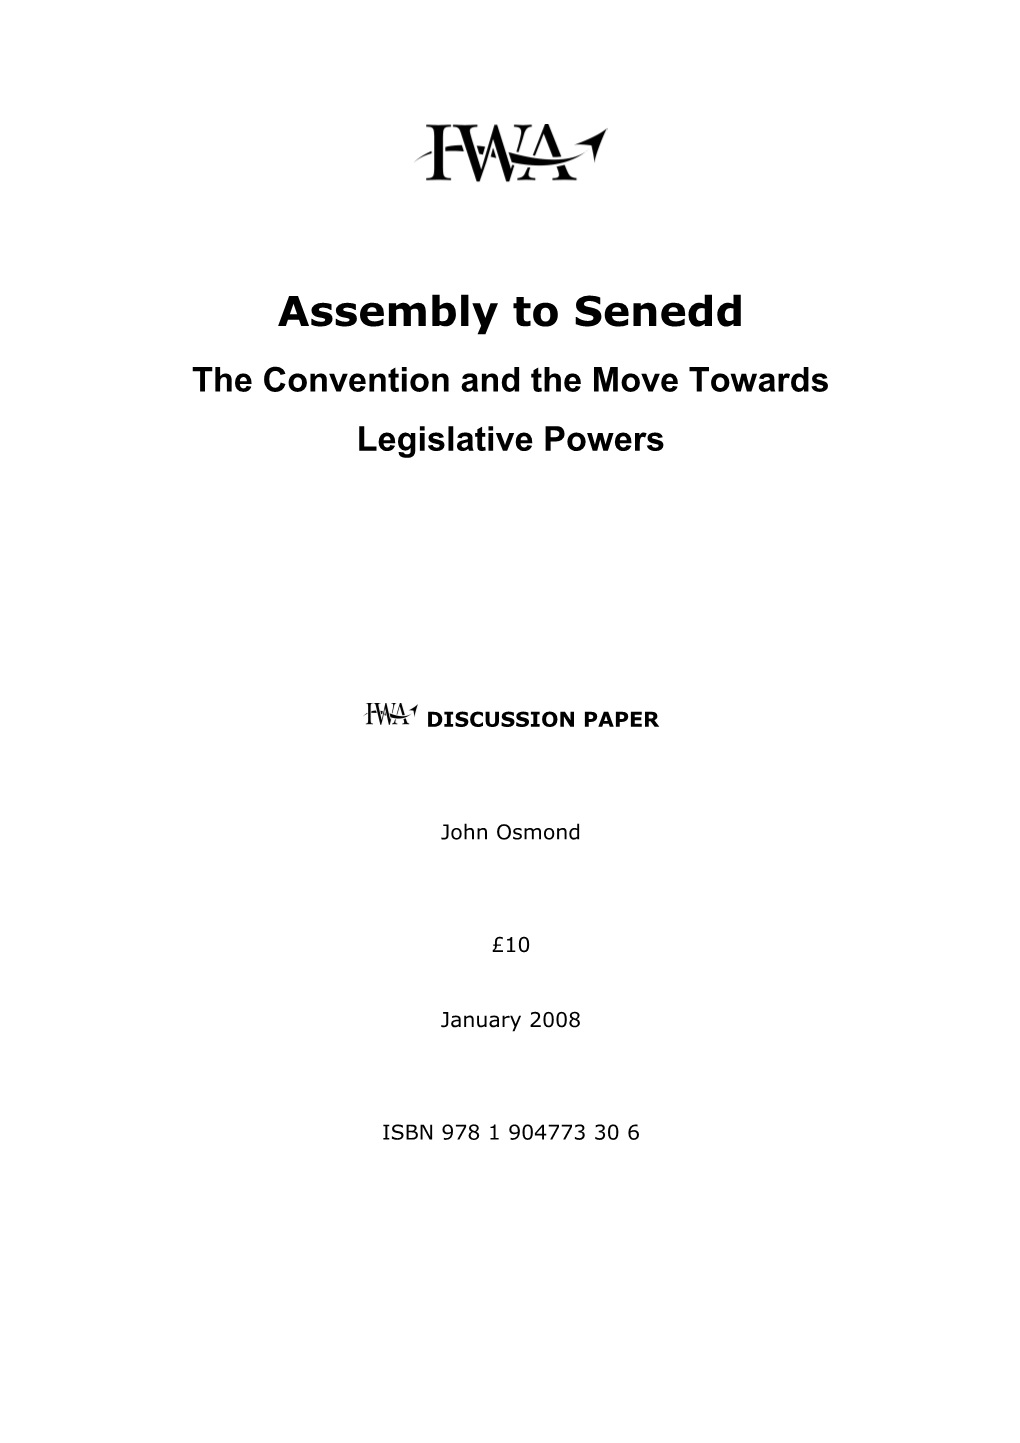 The Convention and the Move Towards Legislative Powers